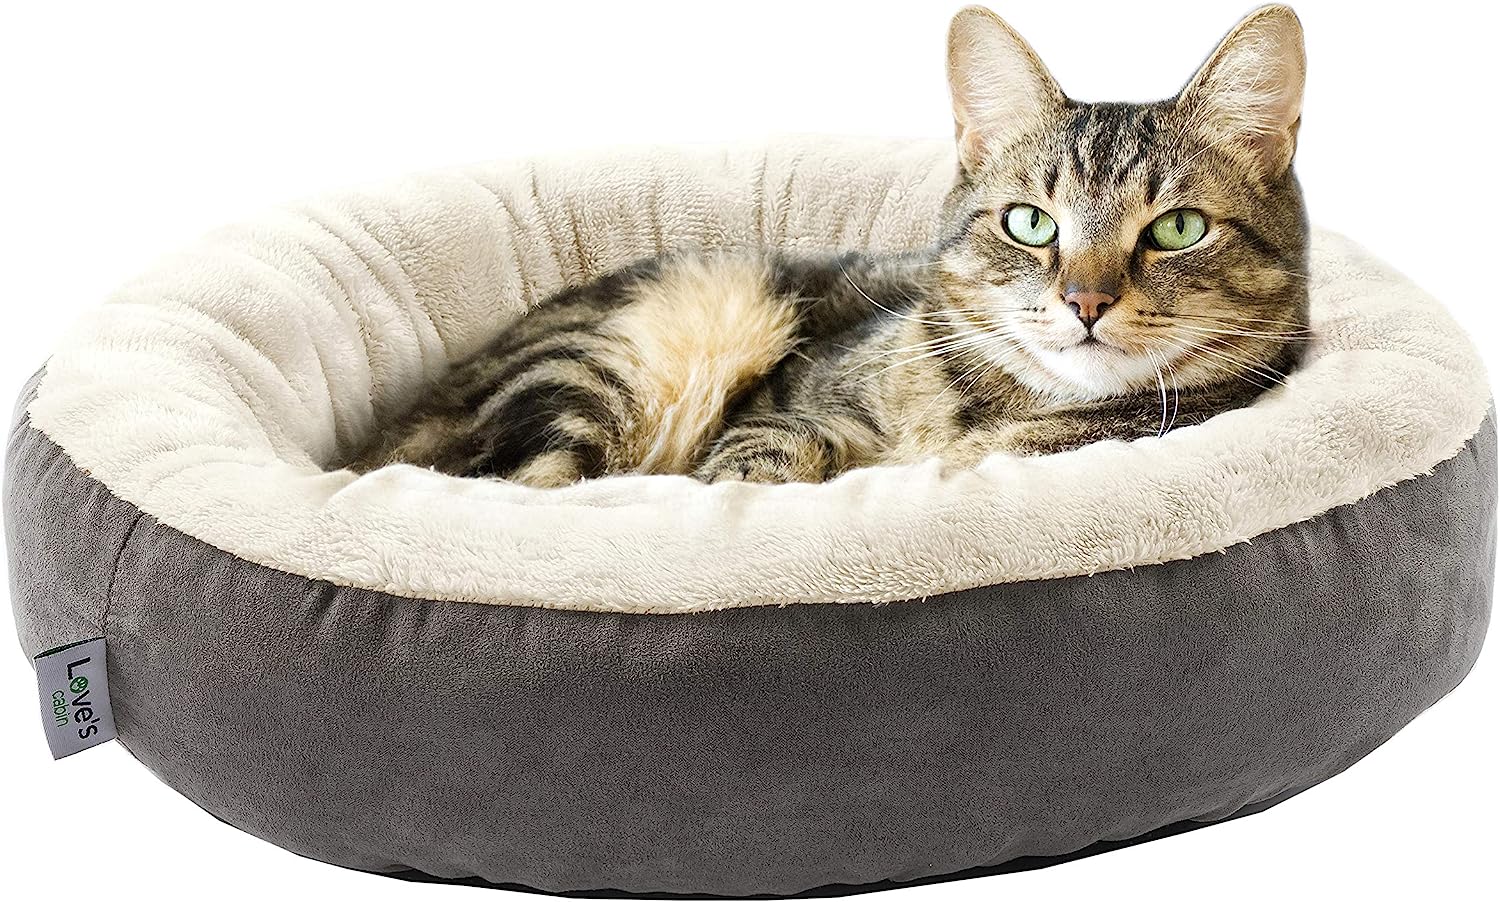 6. Love's Cabin Round Donut Cat Bed